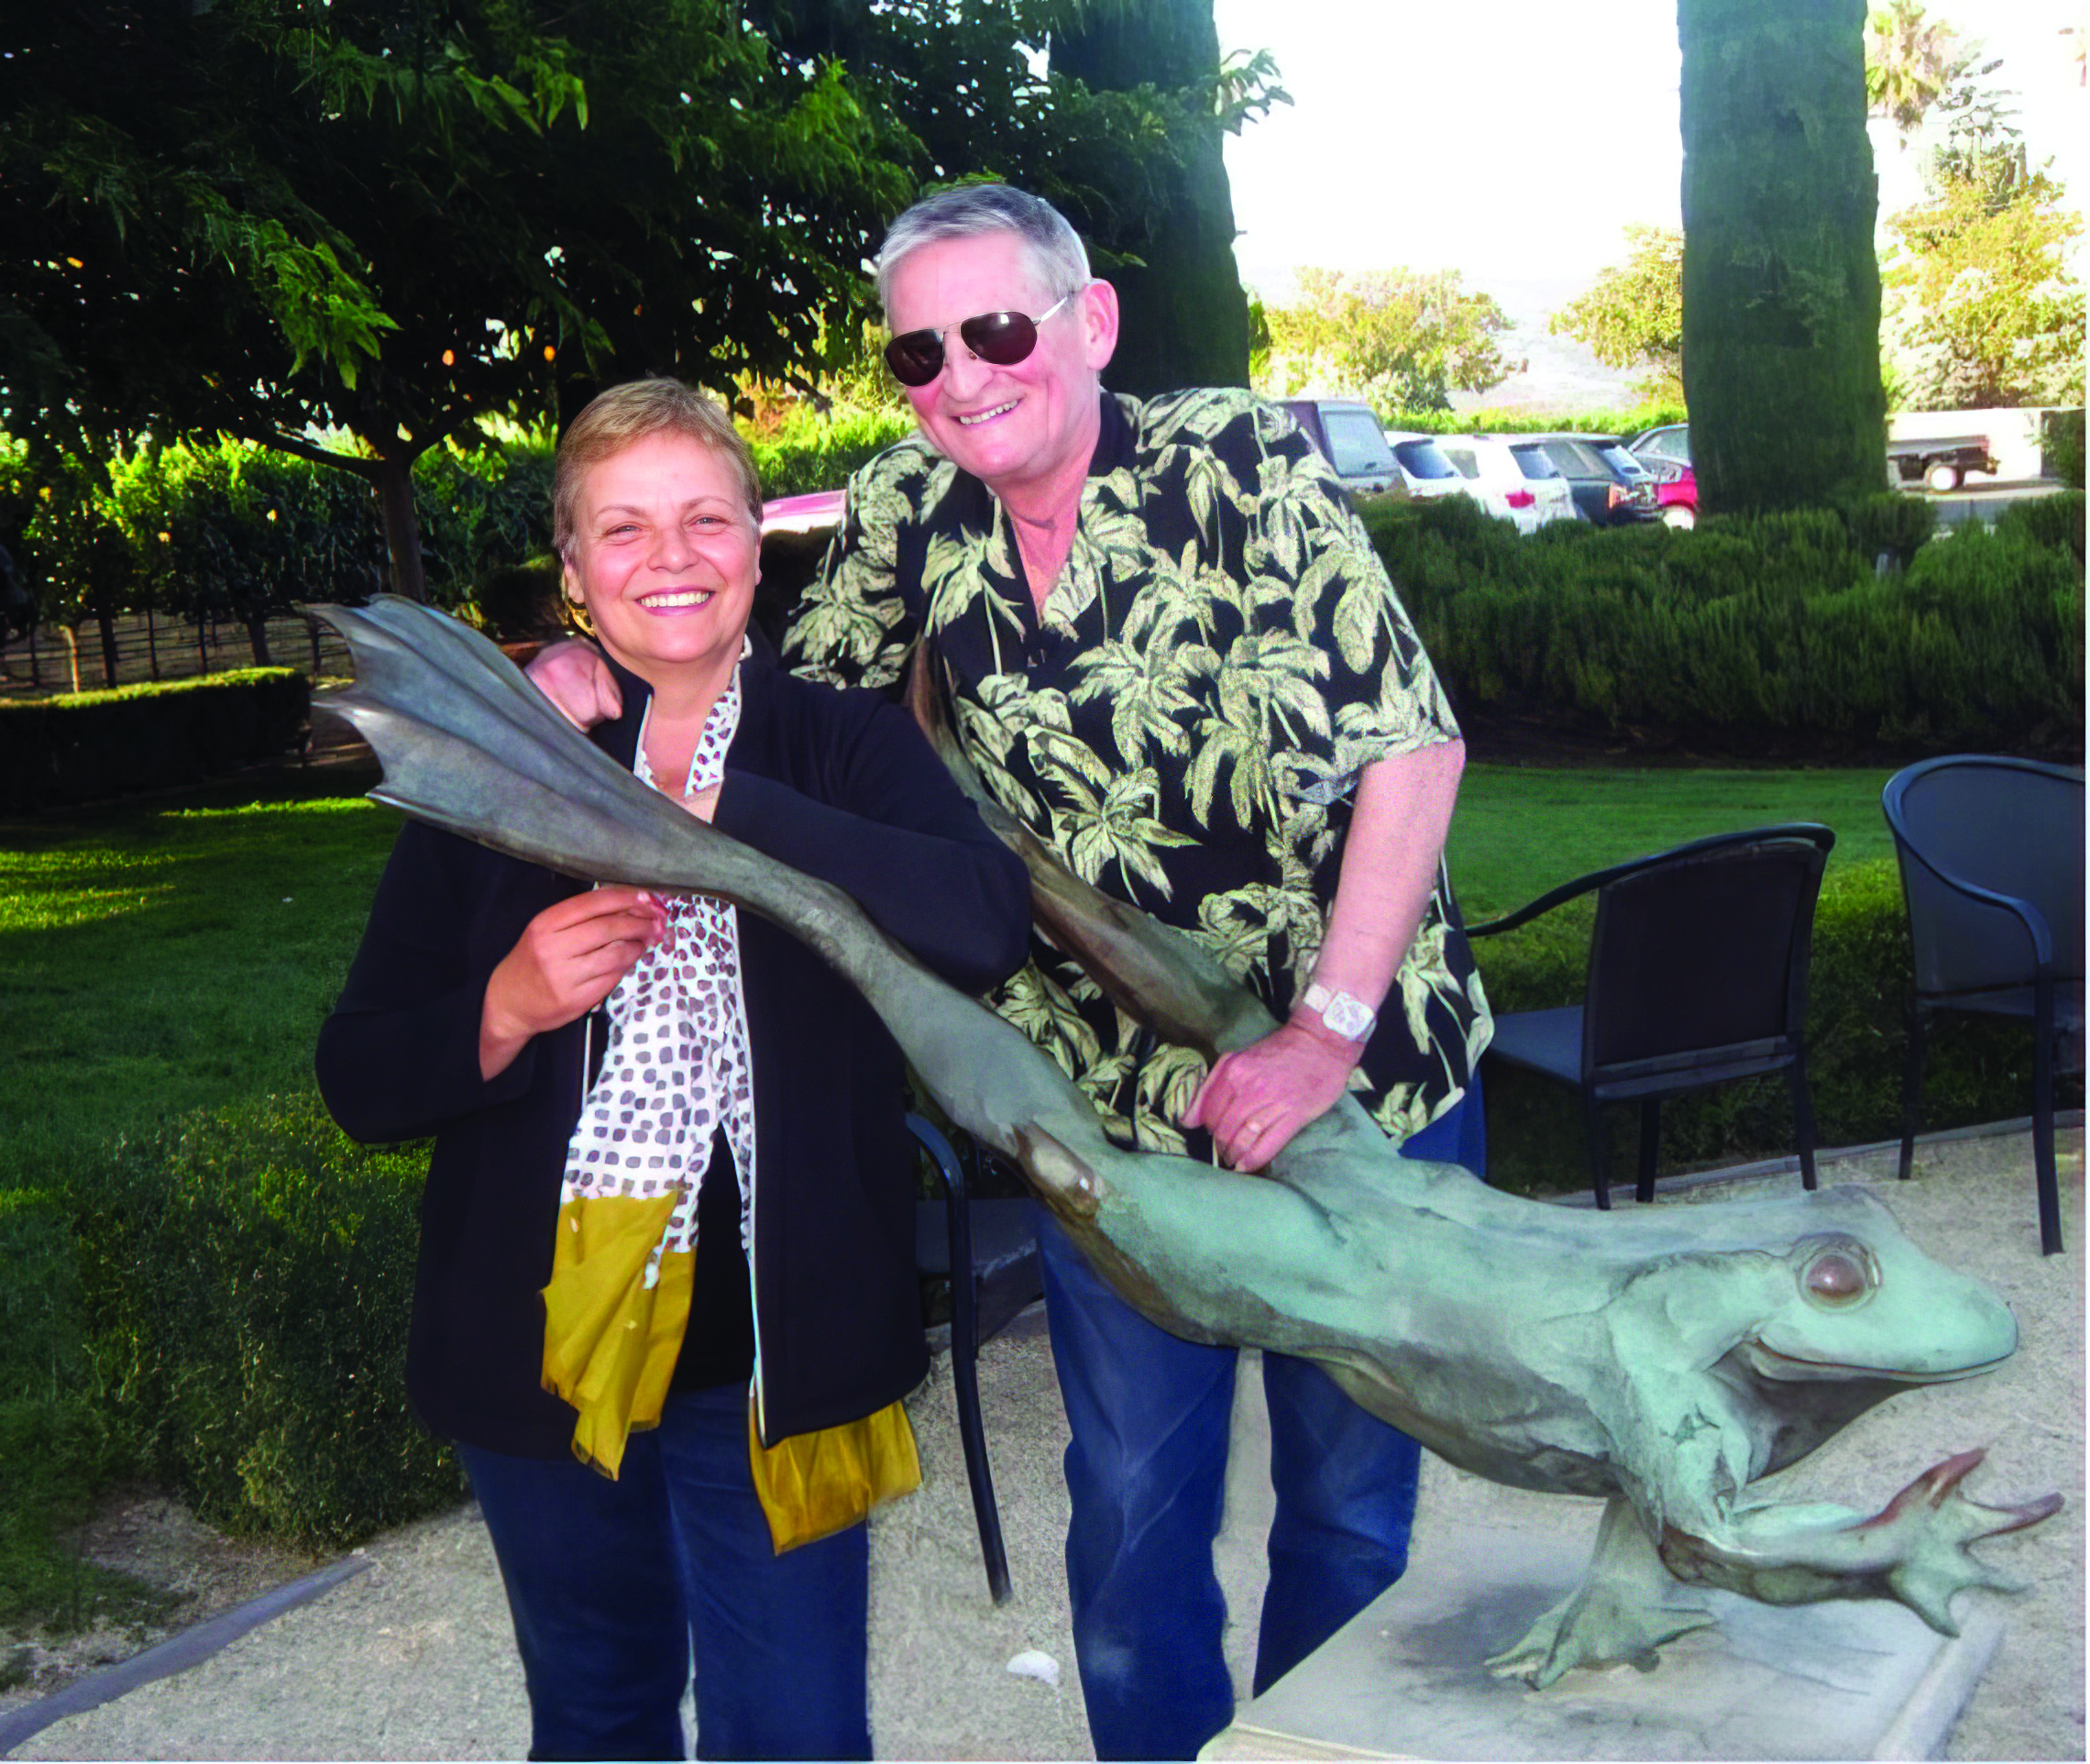 Photo of Donna, wearing a dark jacket and polka dot scarf, and Bob in a Hawaiian shirt, standing next to a statue of a frog.